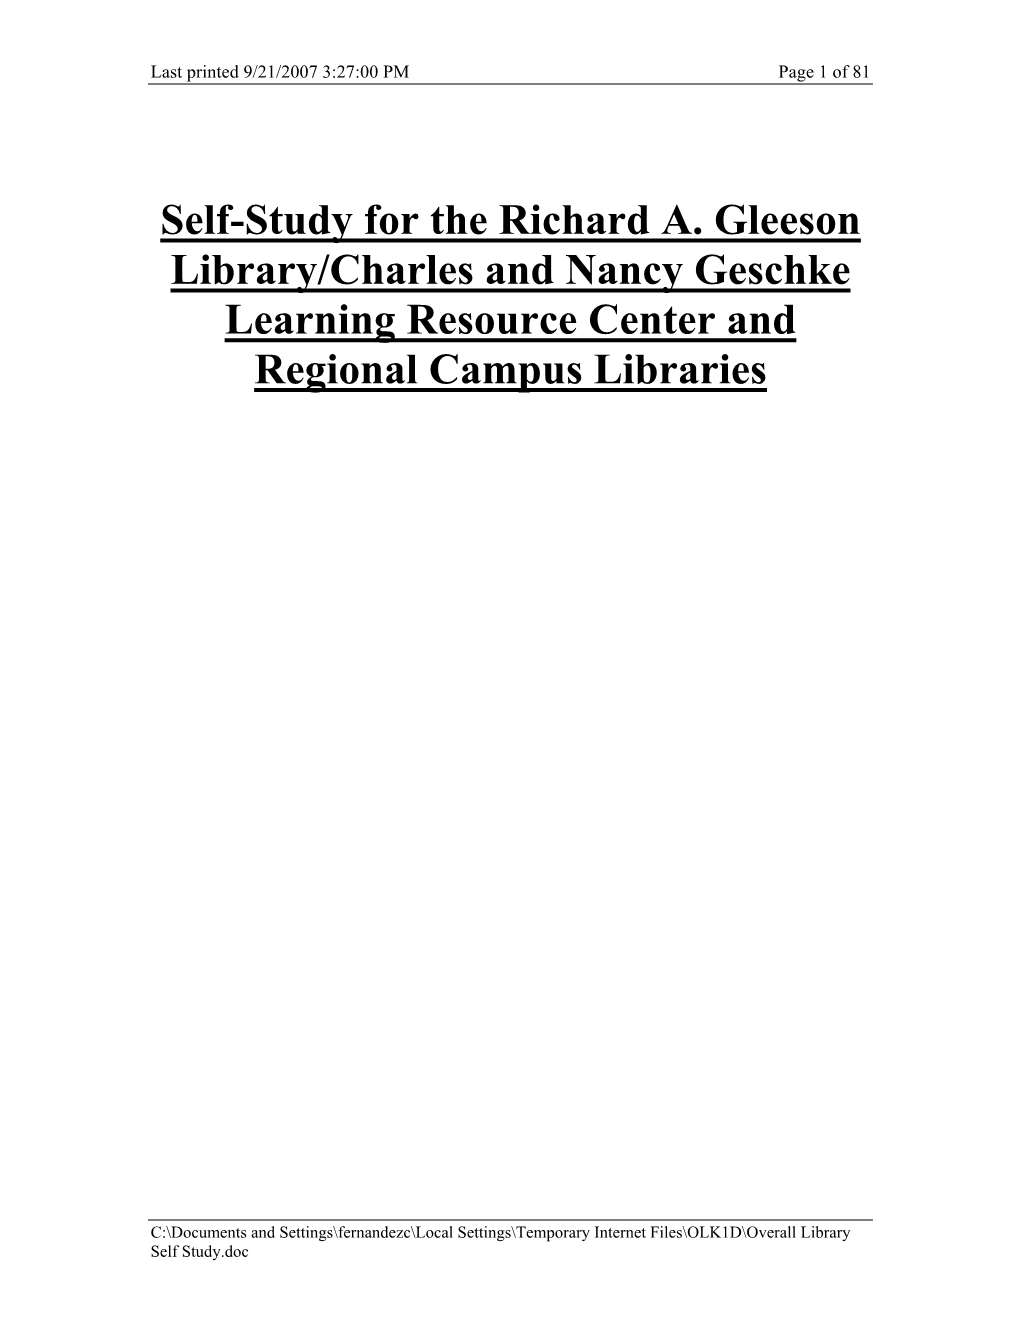 Self-Study for the Richard A. Gleeson Library/Charles and Nancy Geschke Learning Resource Center and Regional Campus Libraries